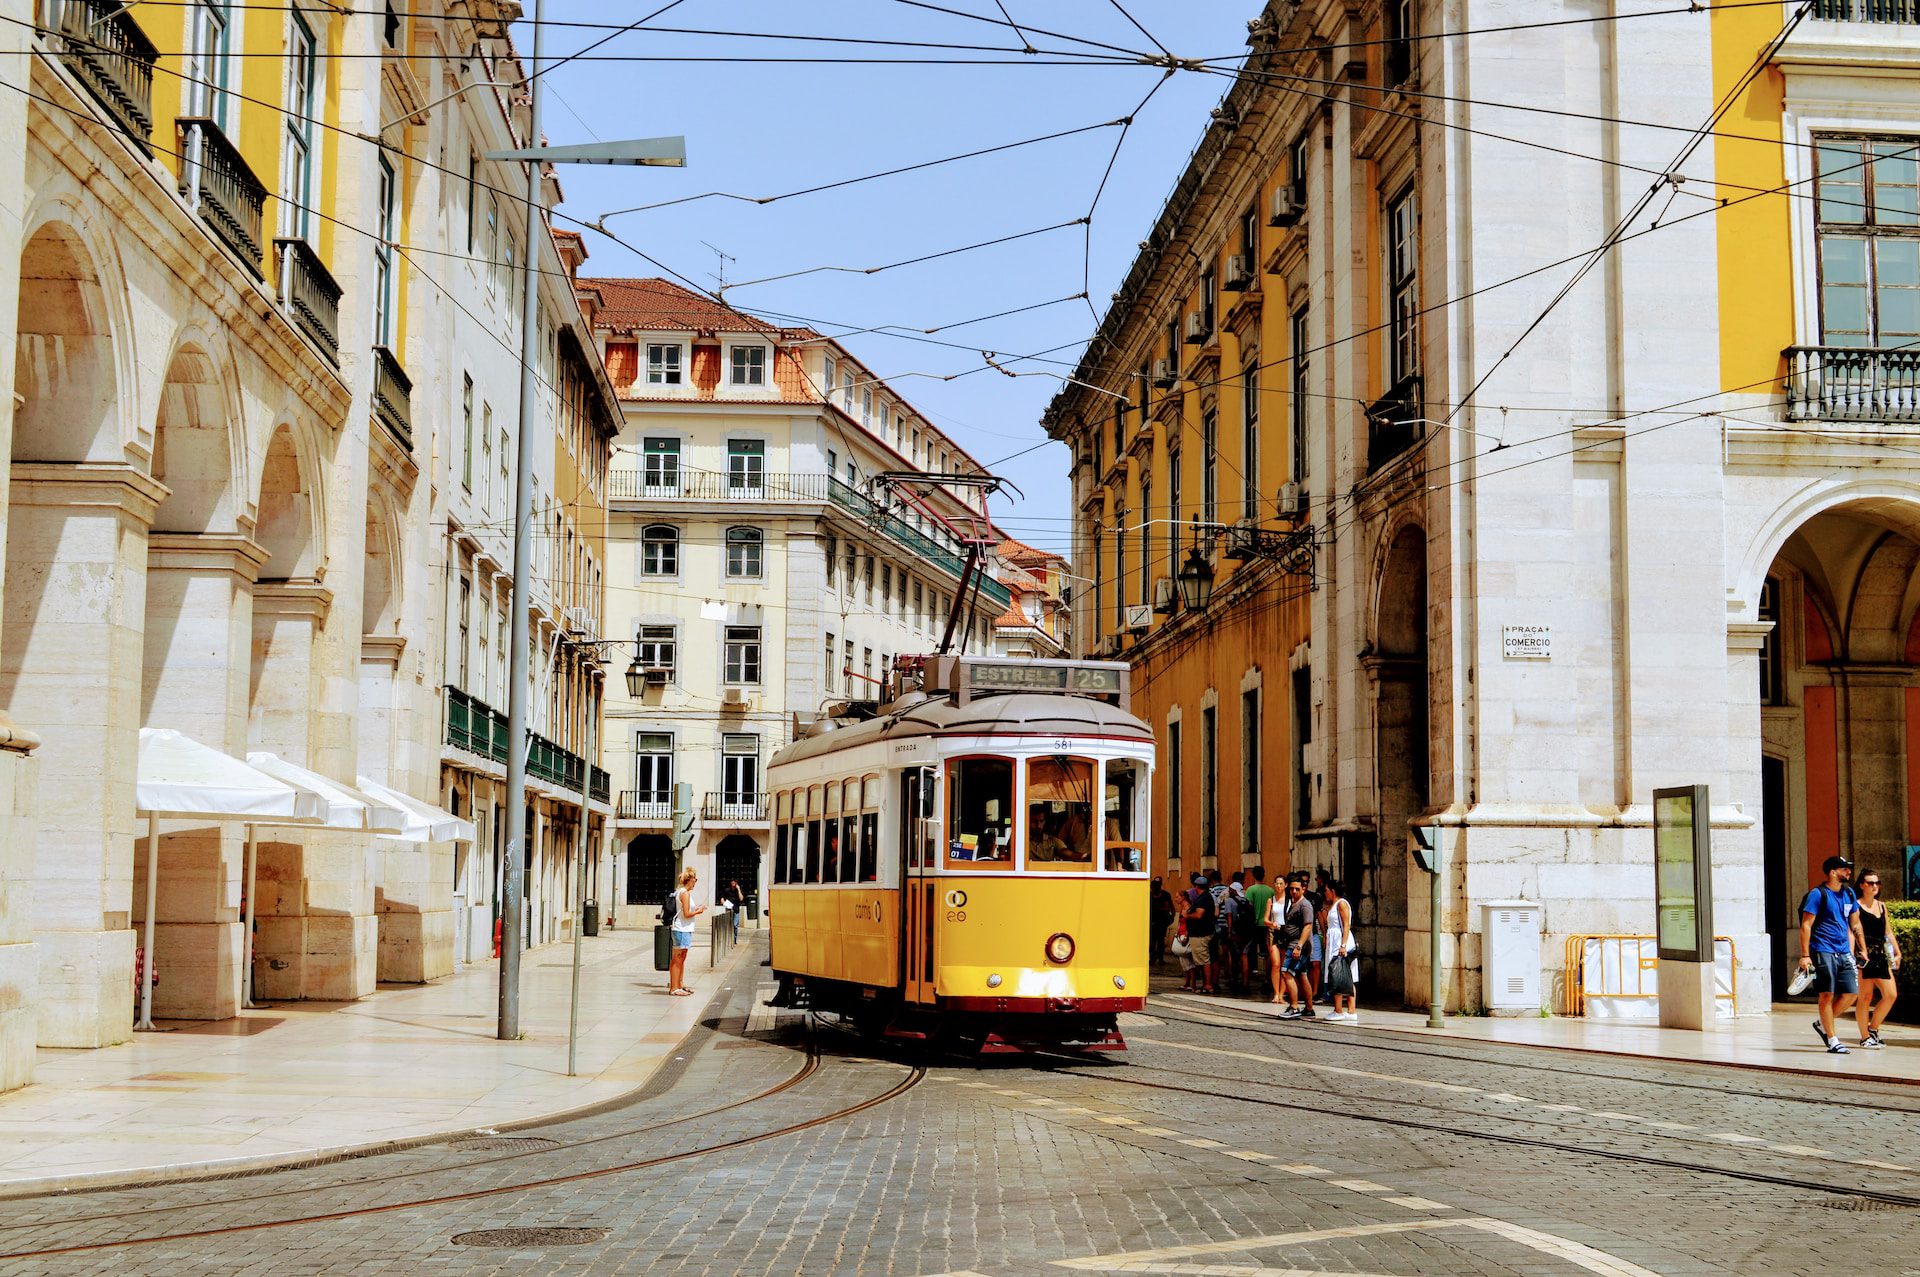 A yellow tram in Lisbon city centre, with houses on both sides and blue skies above.